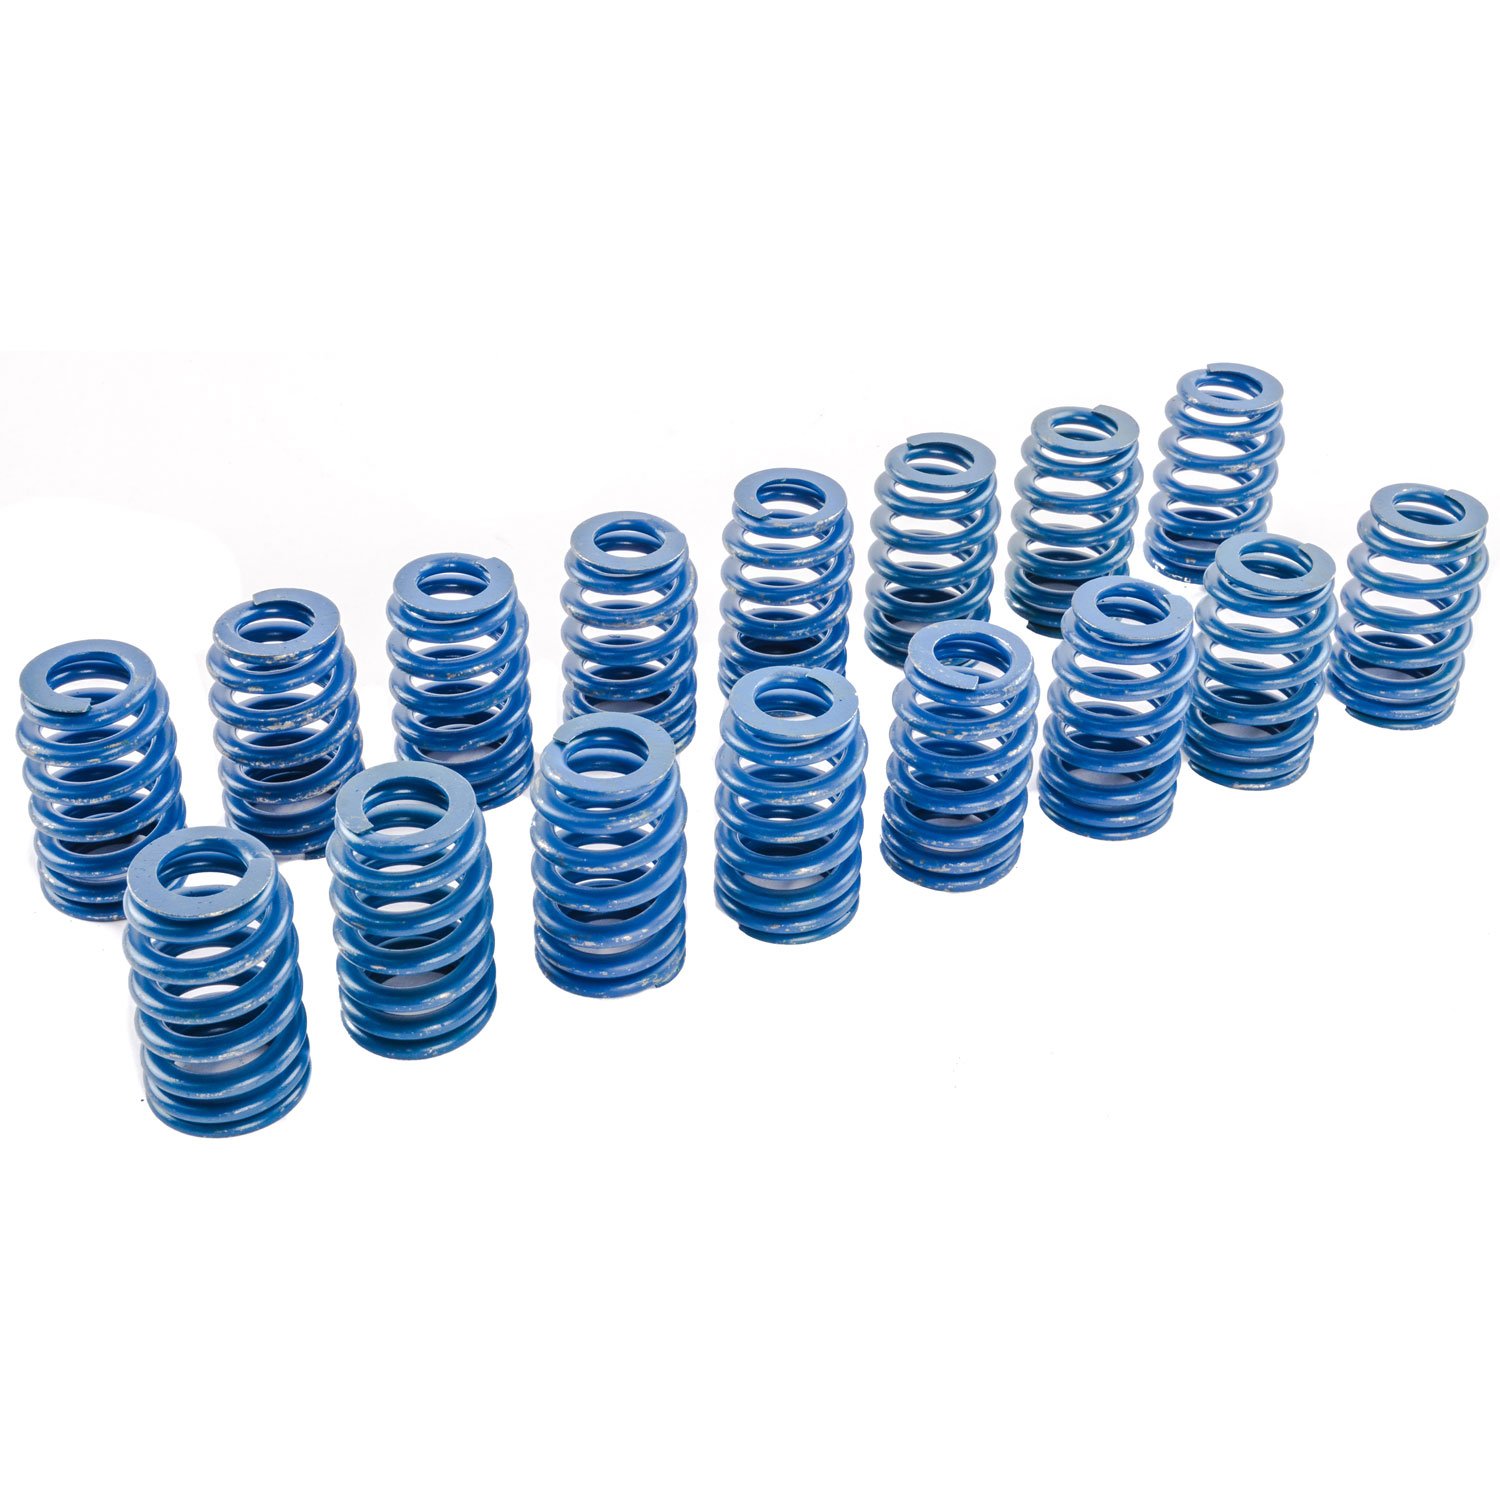 Chevy 19420455 [12499224]: Beehive-Style Valve Spring Set GM LS2/LS3/LS6  1.250 in. 295 lbs. Pressure 1.800 in. Installed Height 90 lbs.  Pressure .550 in. Max Lift Set of 16 JEGS